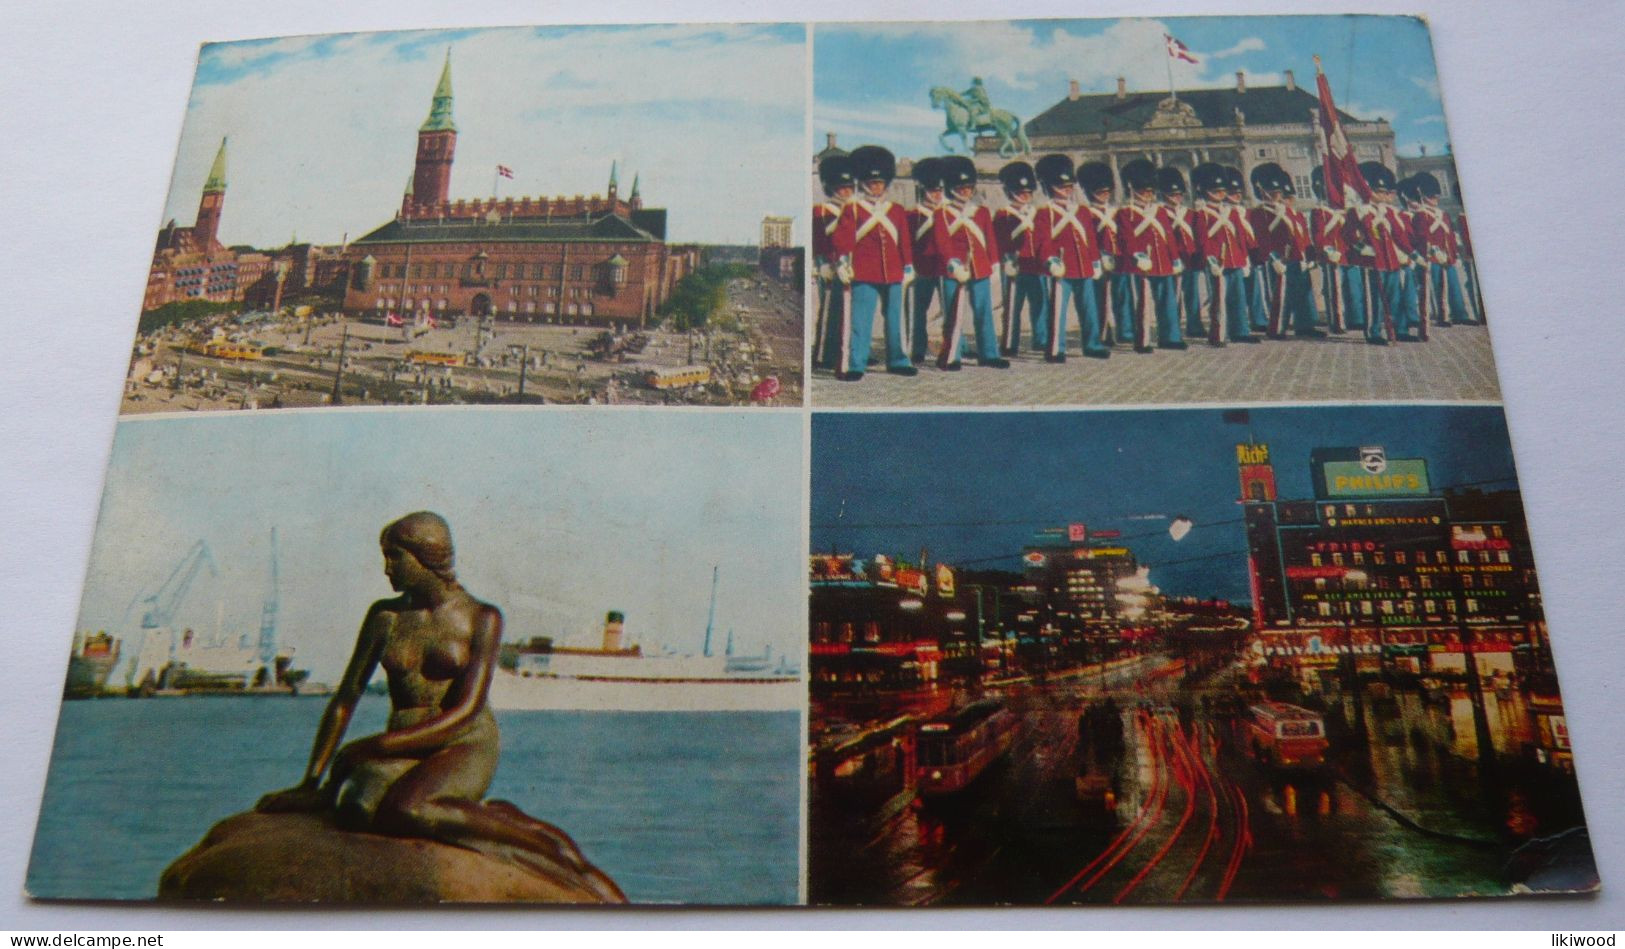 Copenhagen, København  - The City Hall Square By Day And Night, The Little Mermaid, The Royal Guard - Danemark